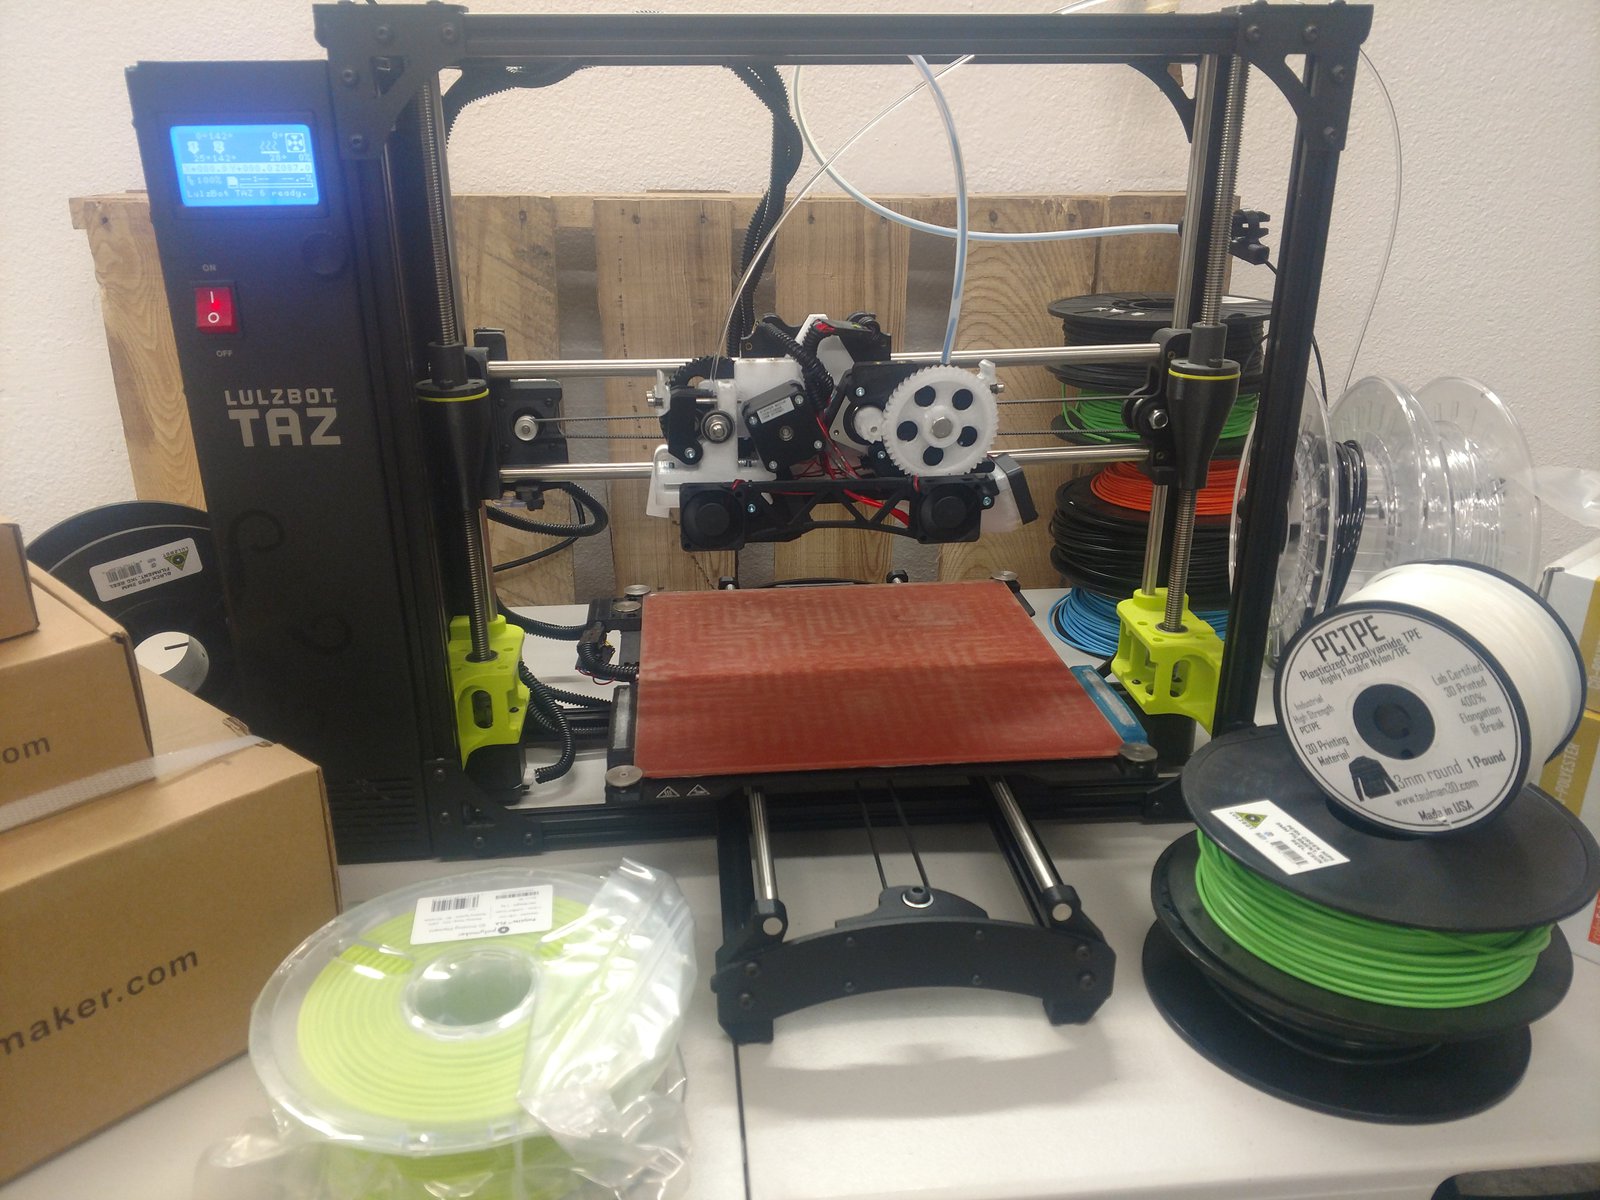 The Twoolhead can print with nearly any material.